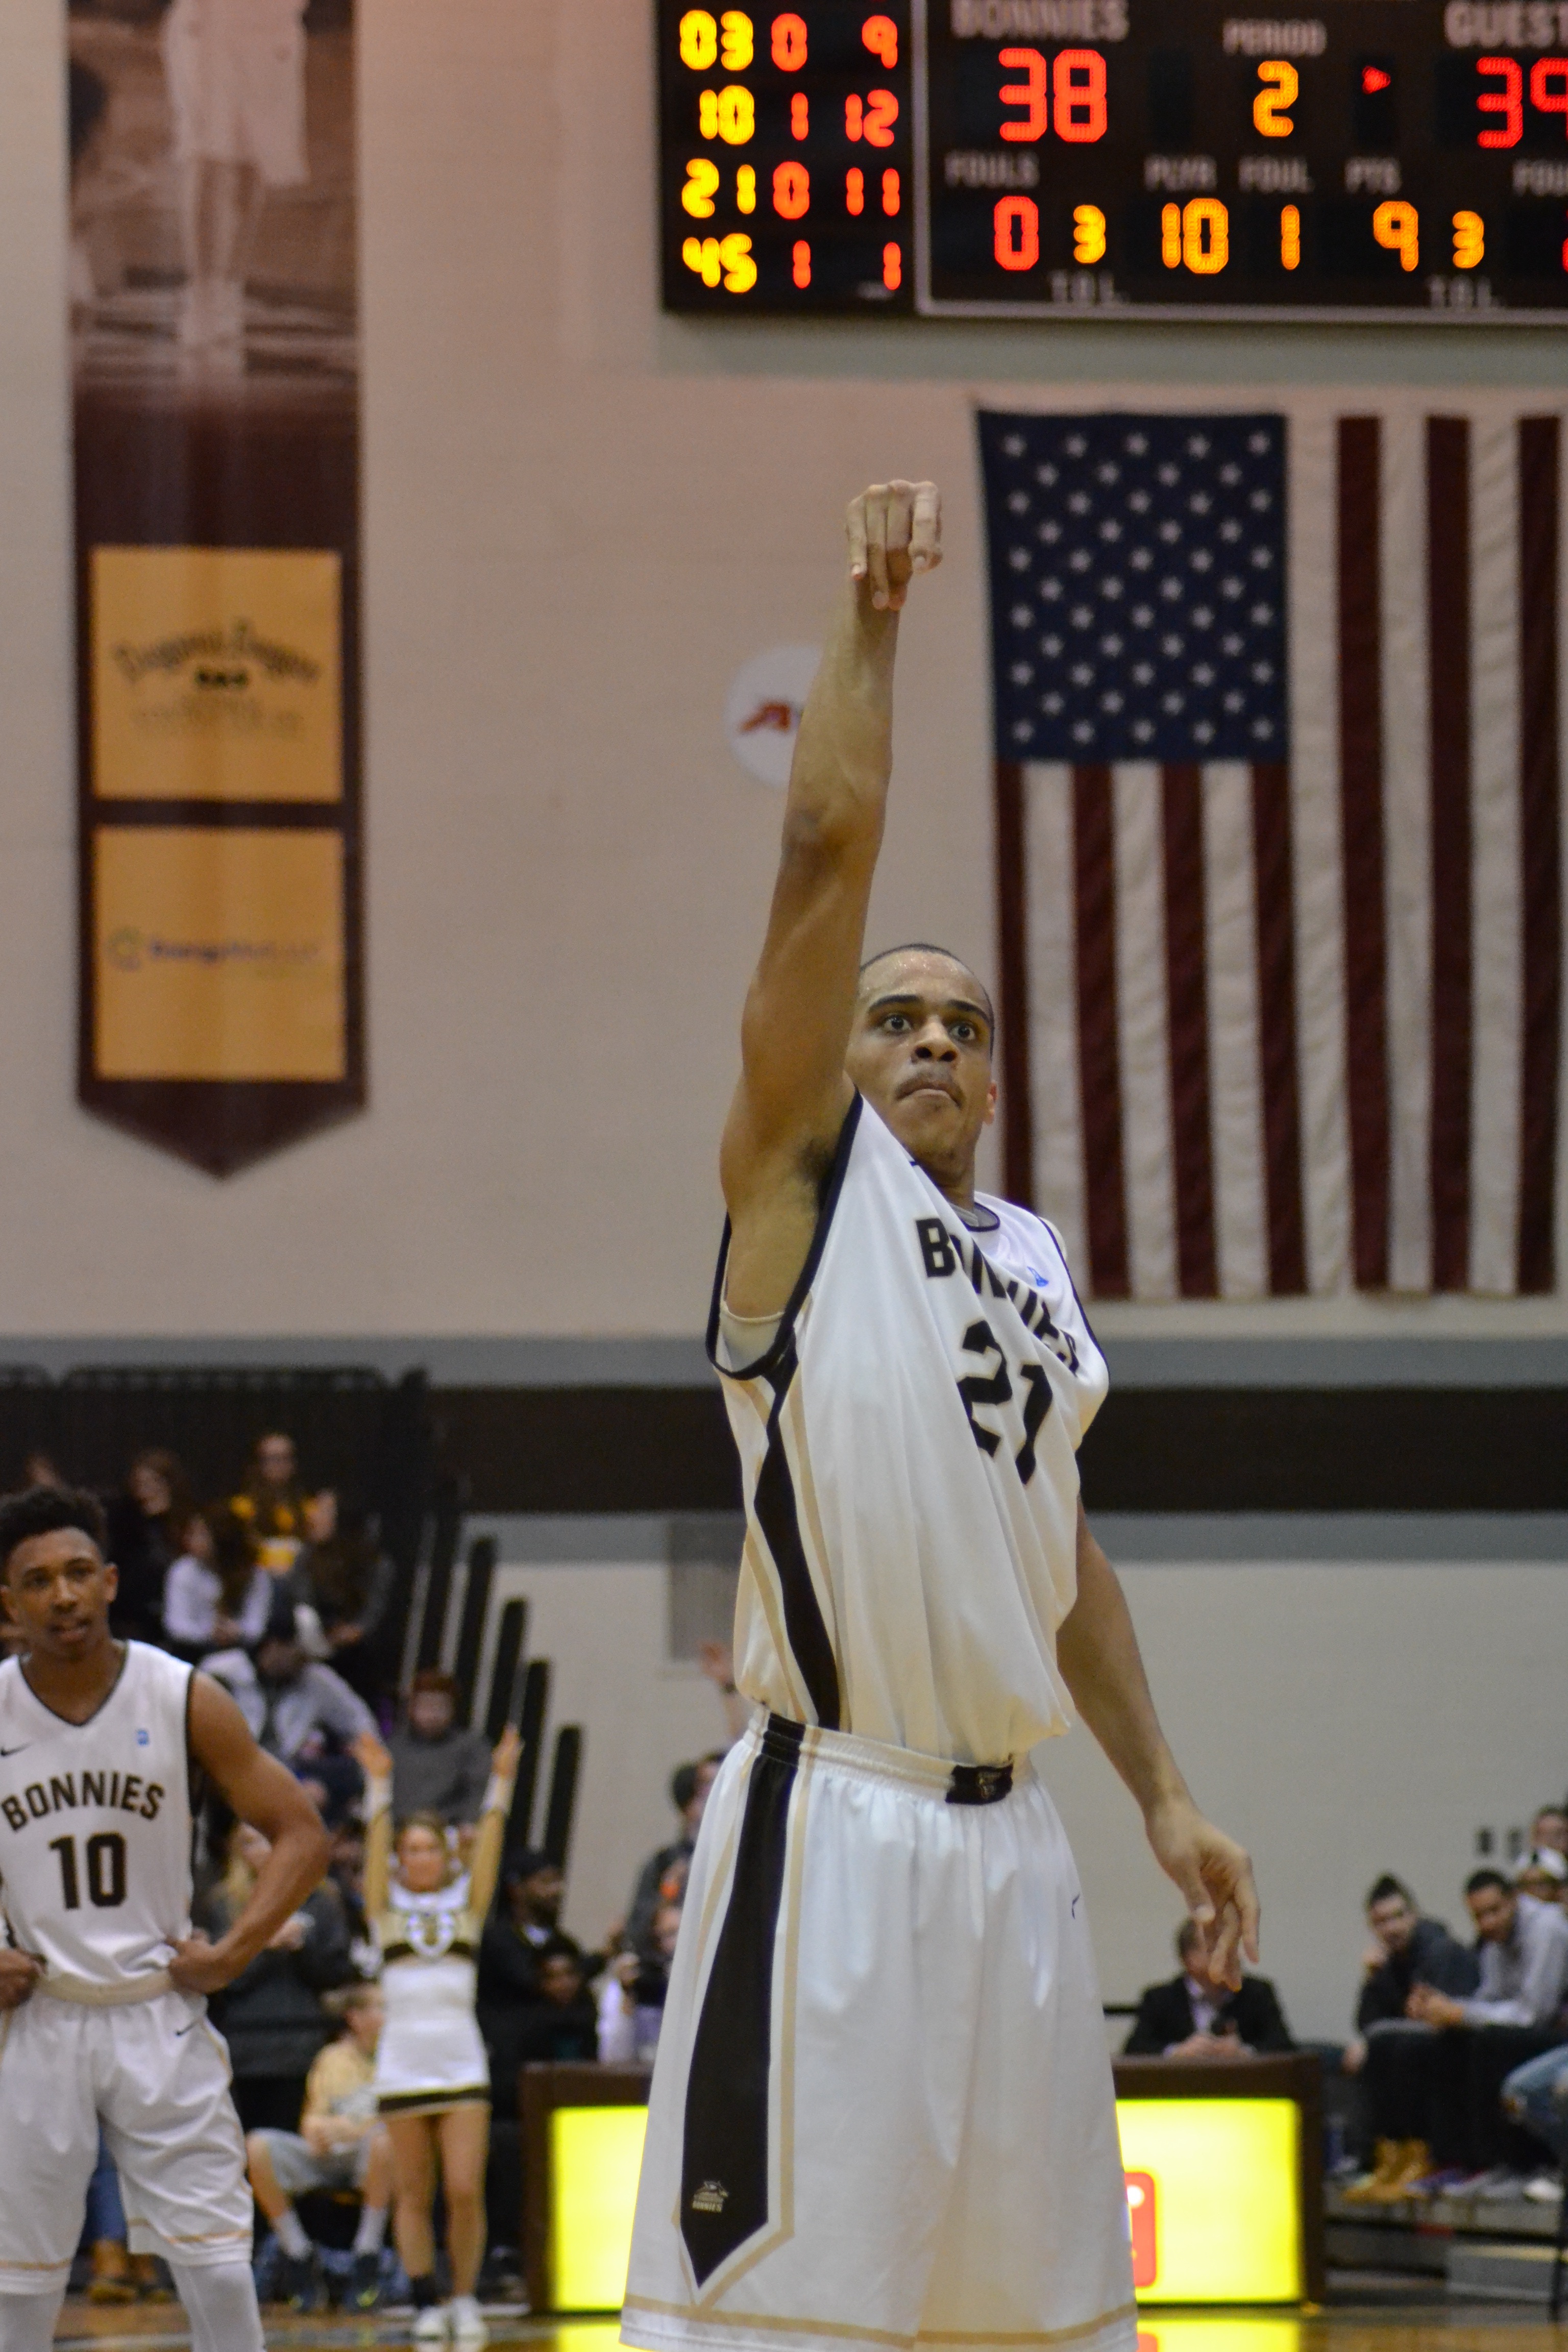 FT shooting once again helped the Bonnies earn a close win. 